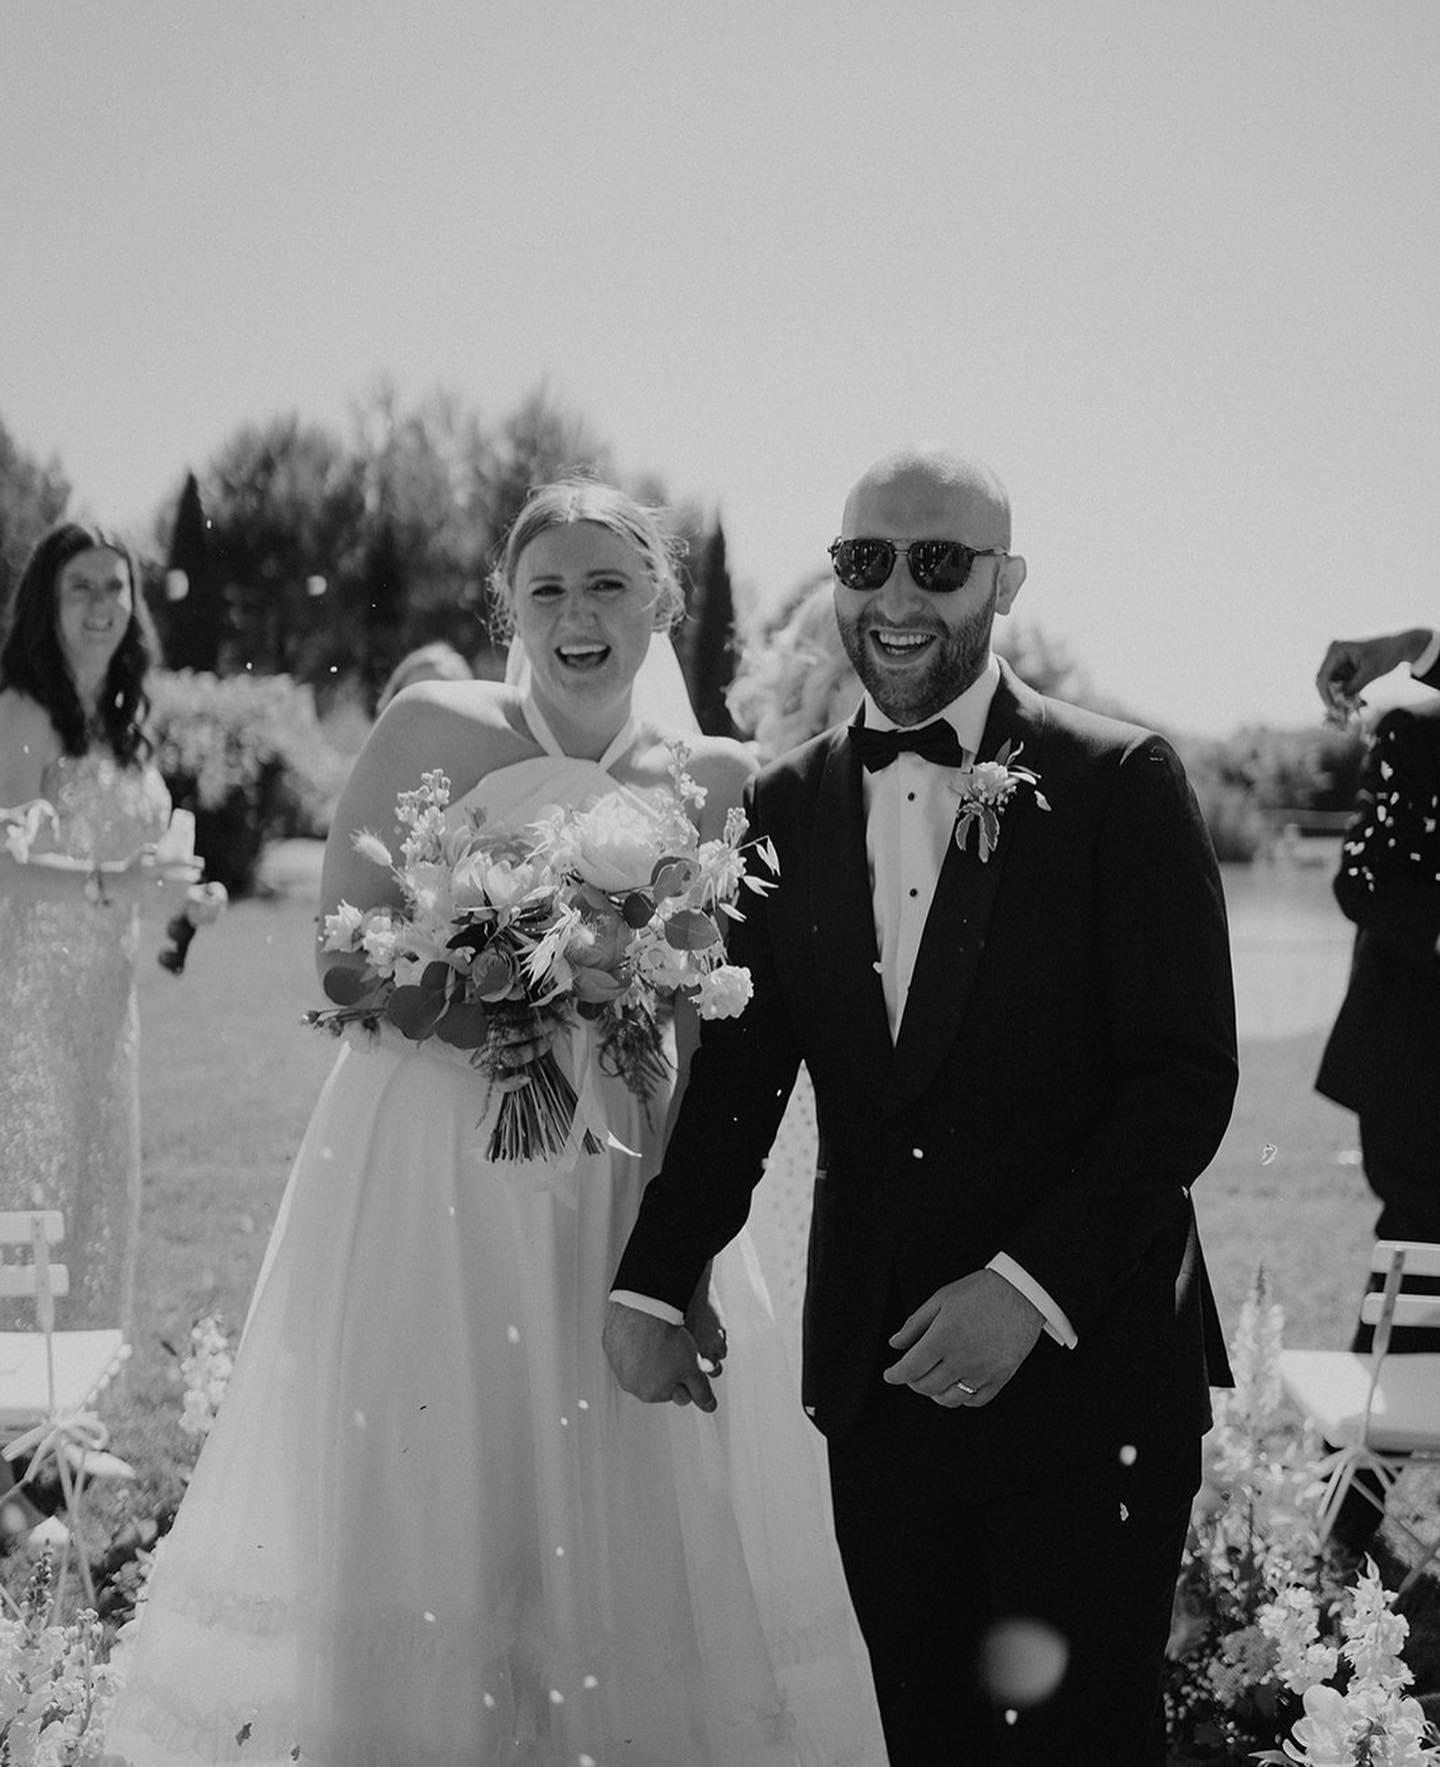 A few frames in black and white from the most beautiful wedding in Provence, France. 

Natalie and Dave’s intimate weddi